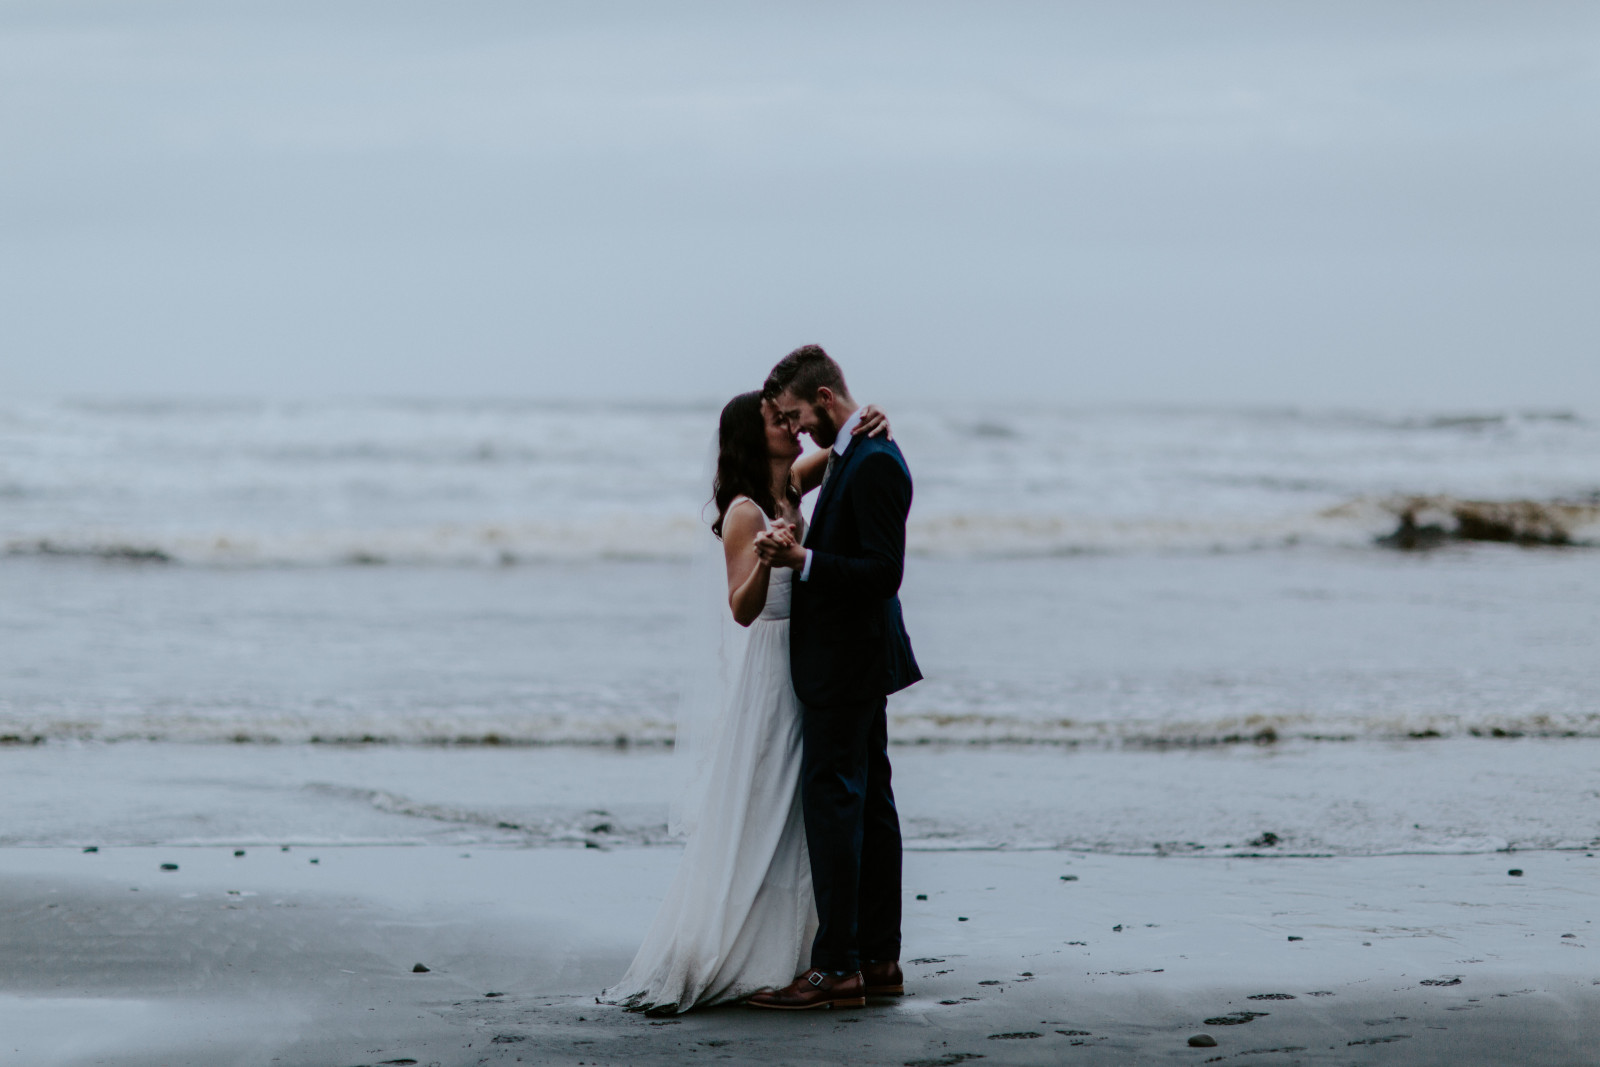 Mollie and Corey dance on the beach. Elopement photography at Olympic National Park by Sienna Plus Josh.